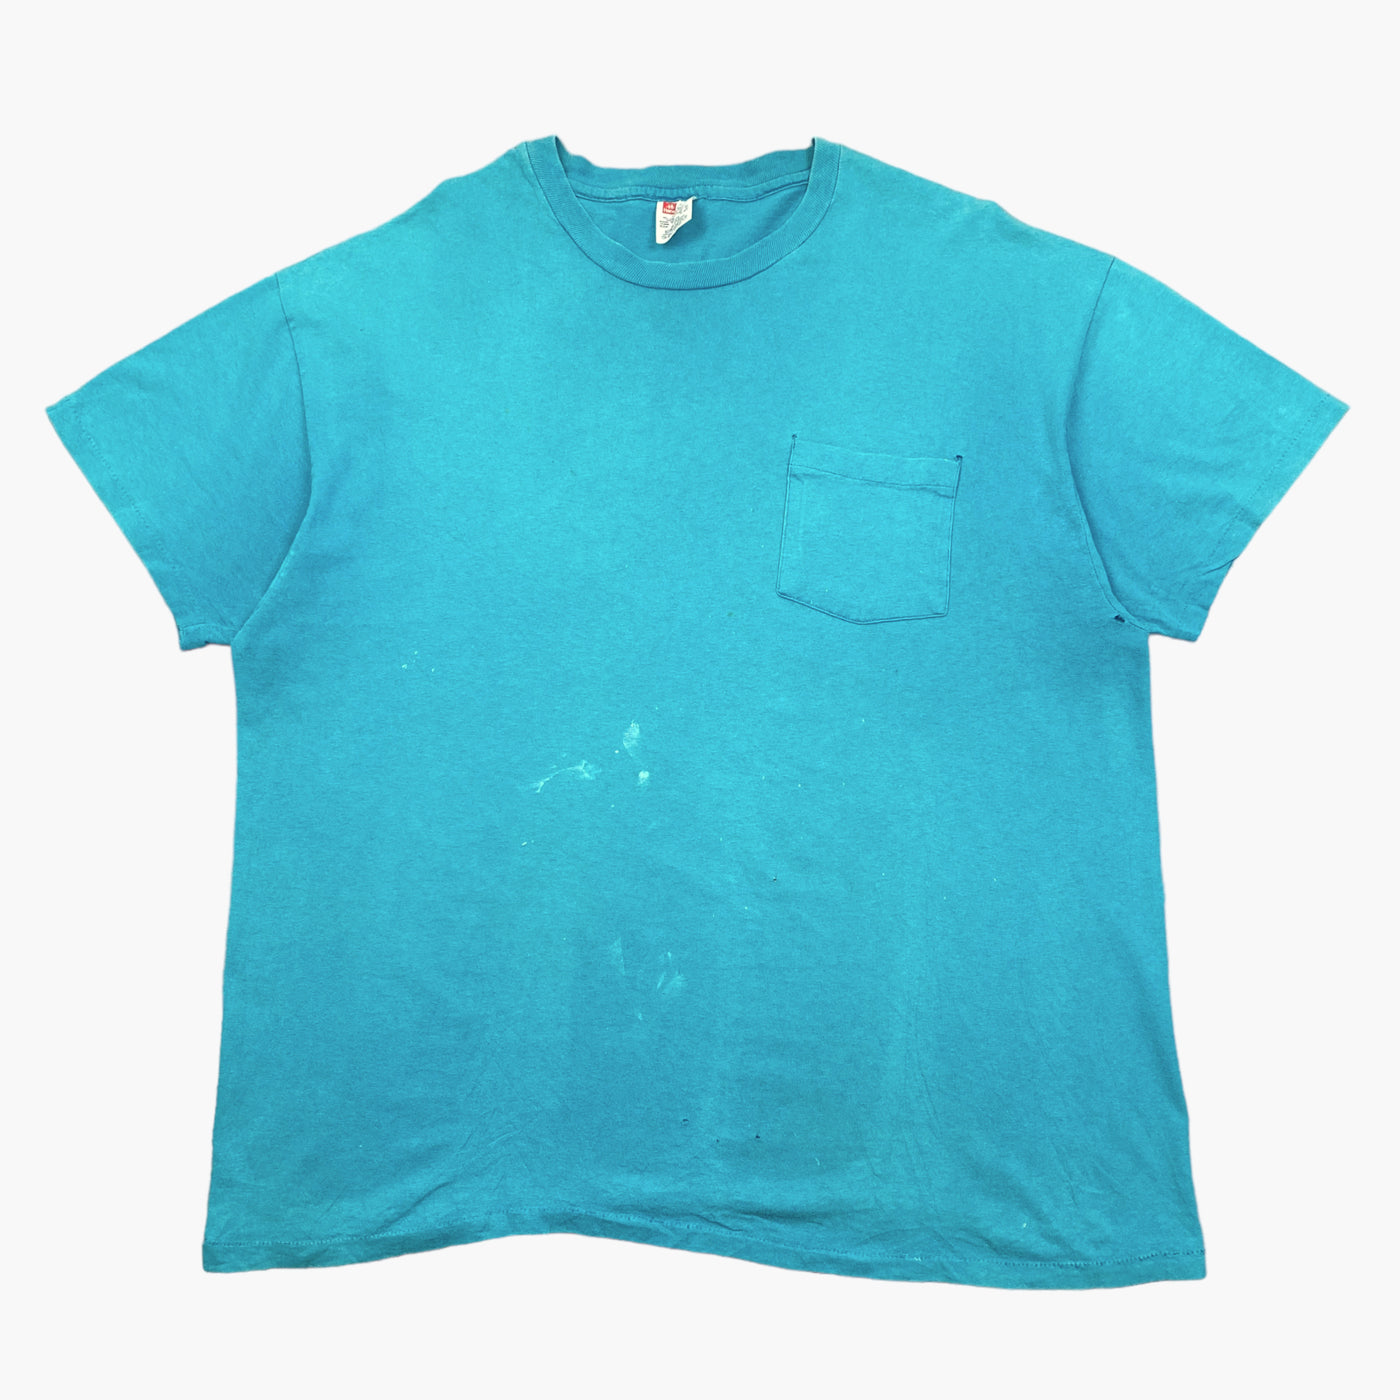 EARLY 90S TEAL POCKET T-SHIRT